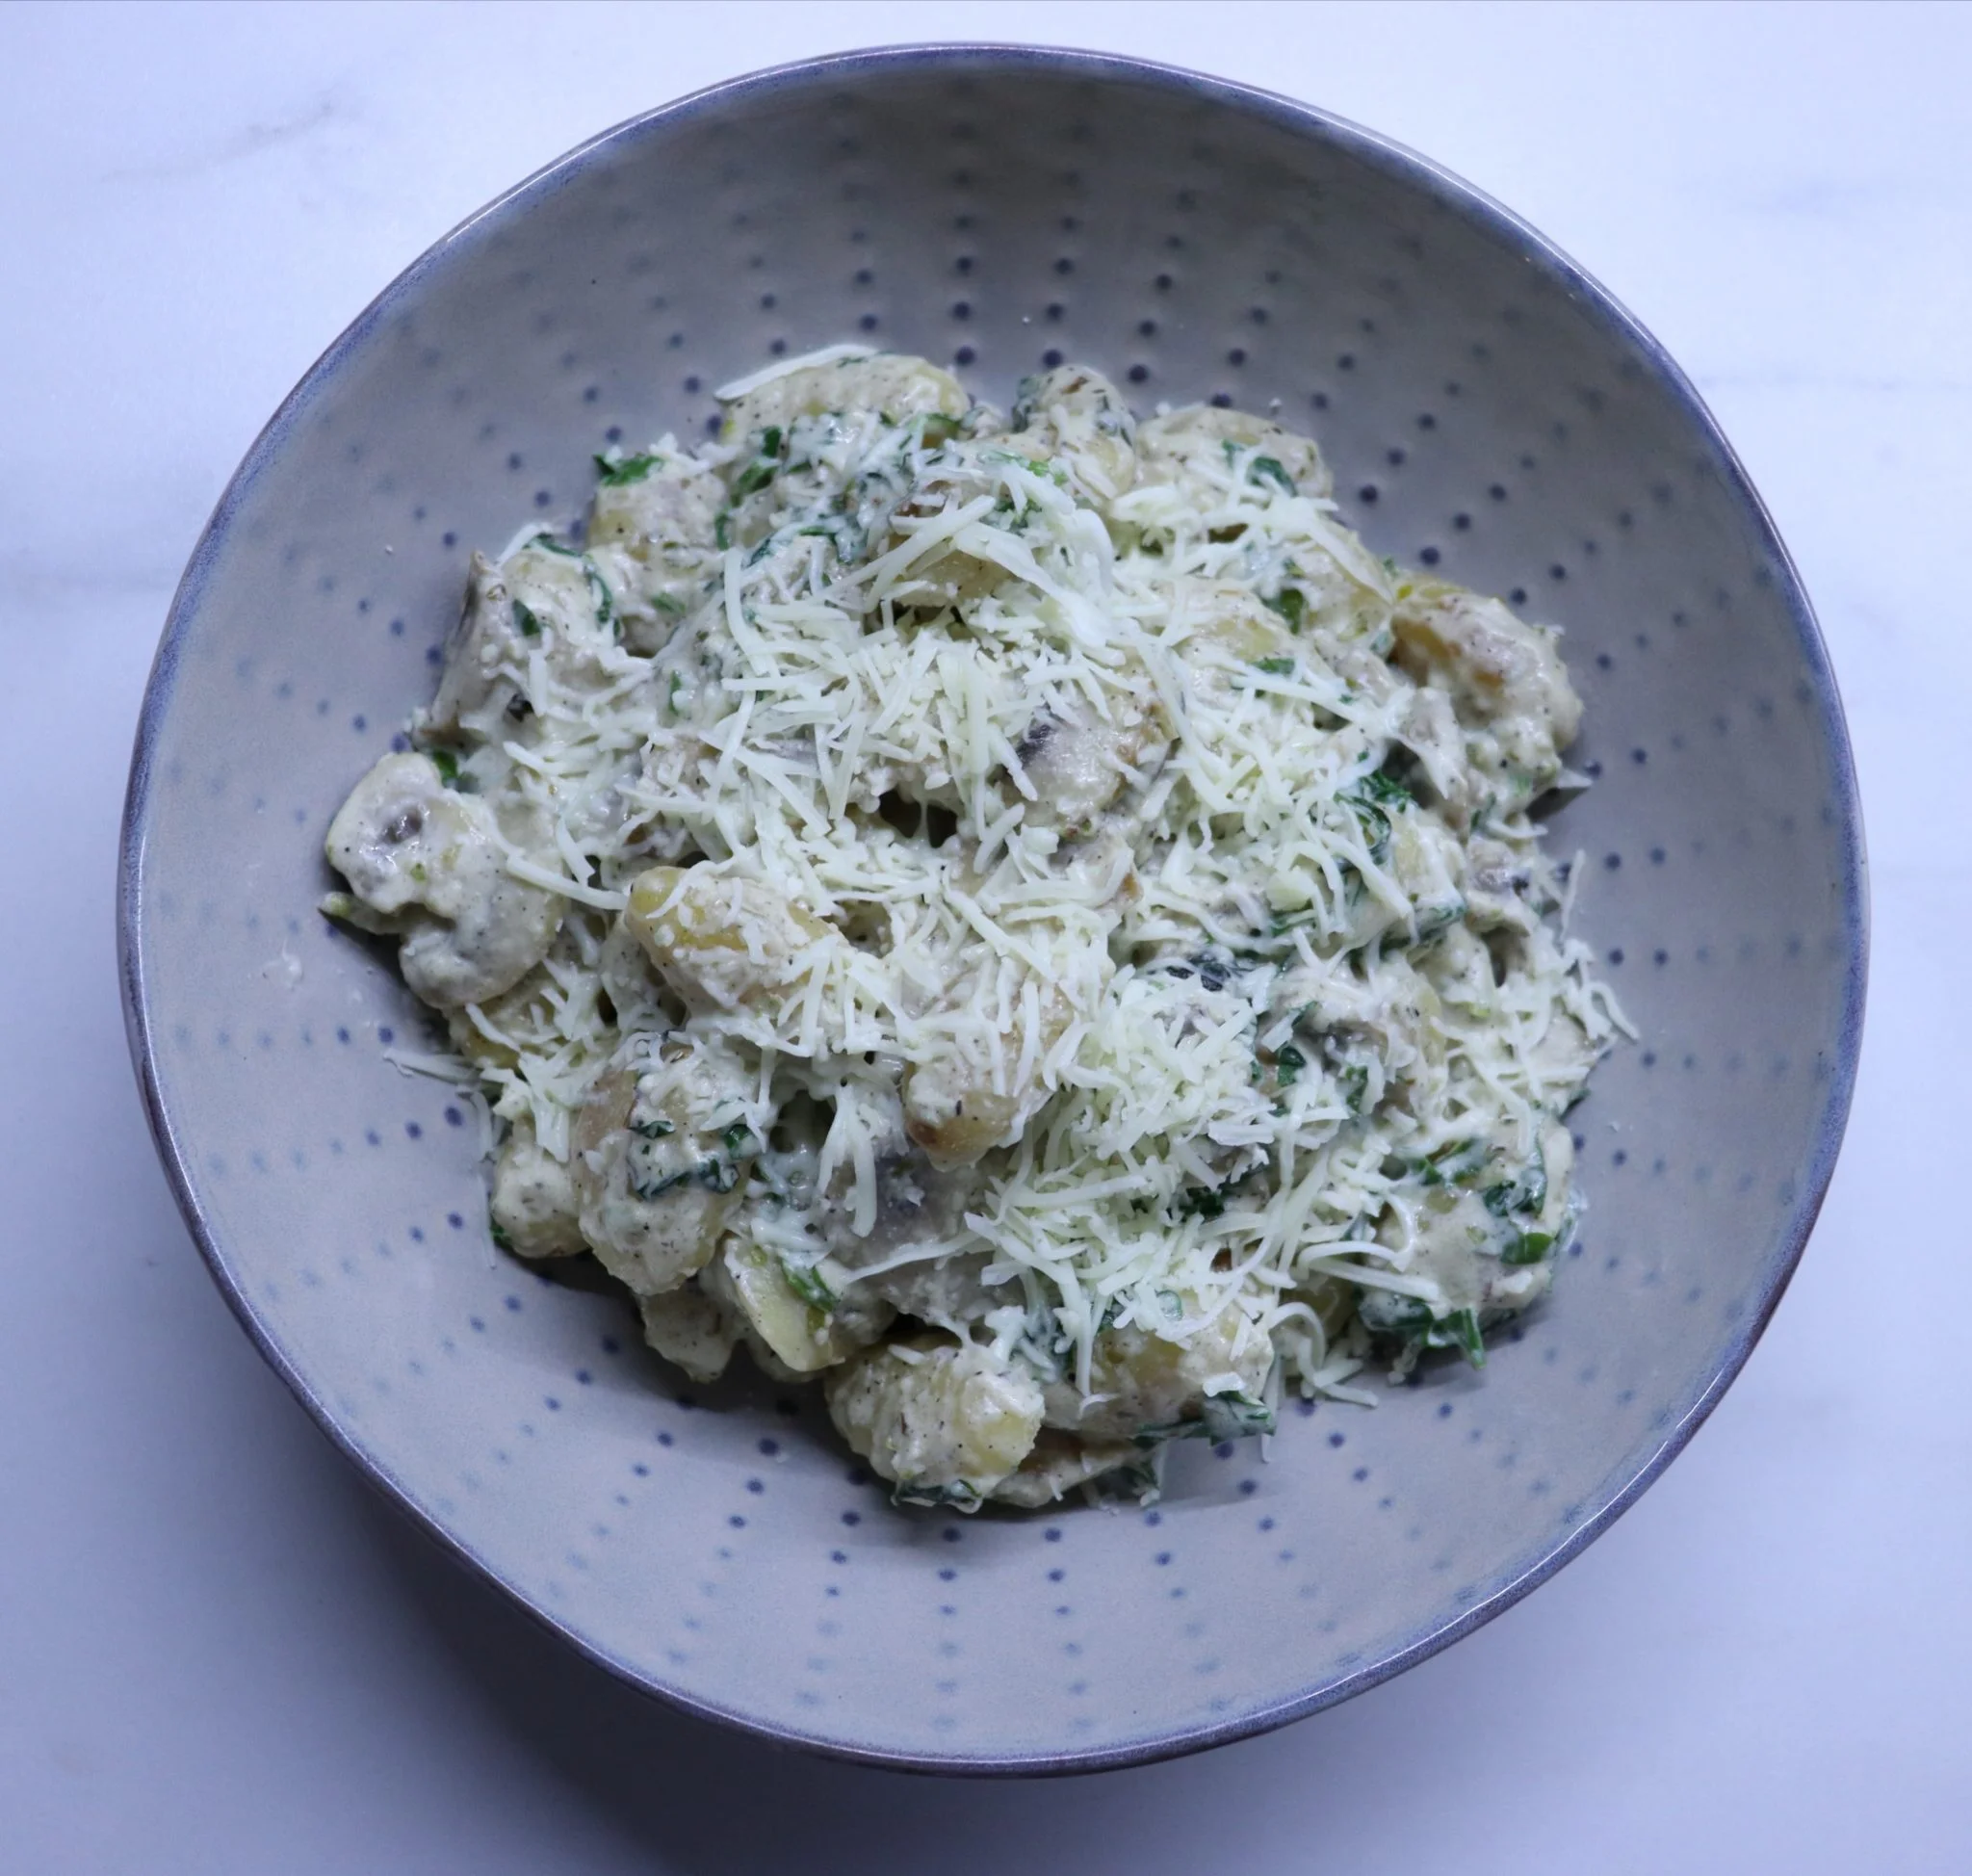 Gnocchi with mushroom and spinach sauce